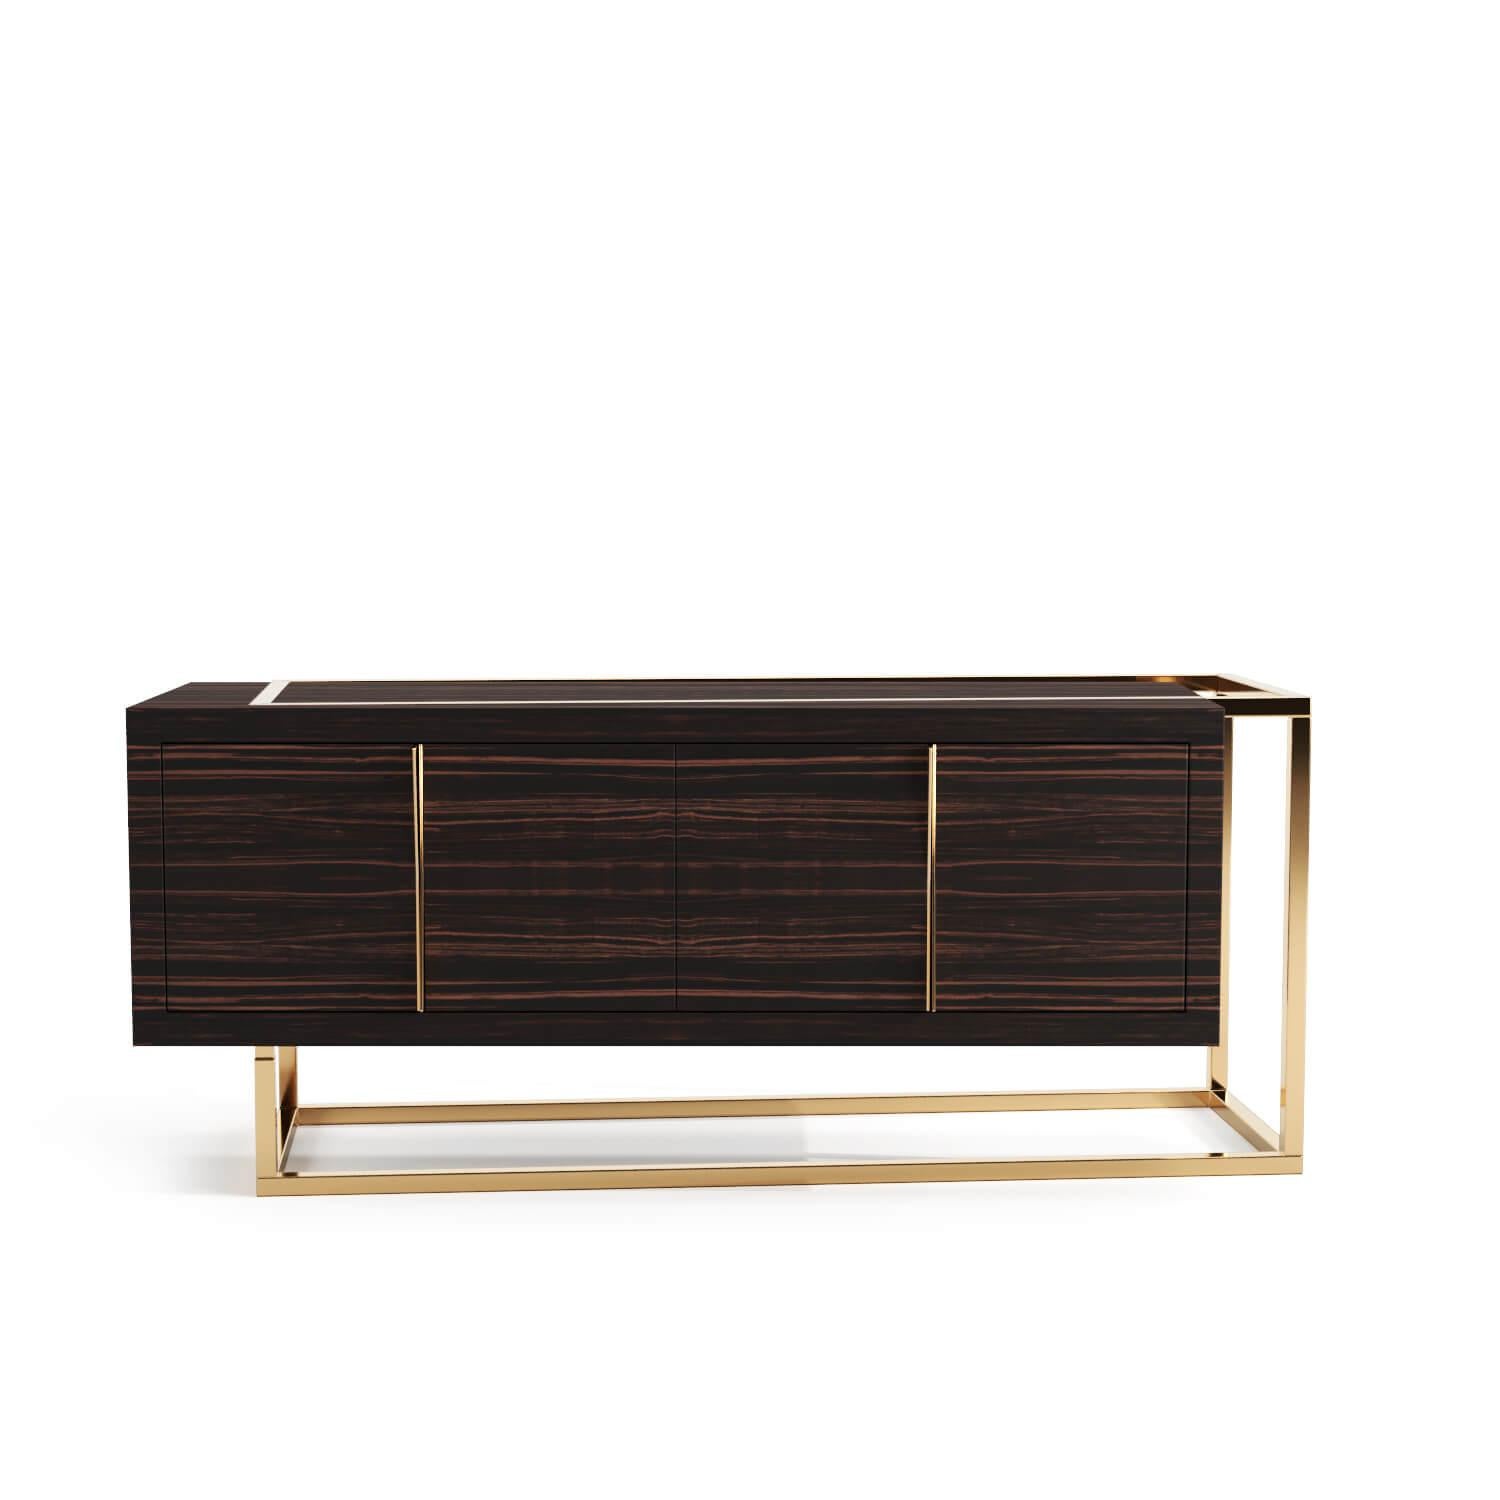 Contemporary Modern Minimalist Credenza Sideboard in Tineo Wood and Brushed Stainless Steel For Sale